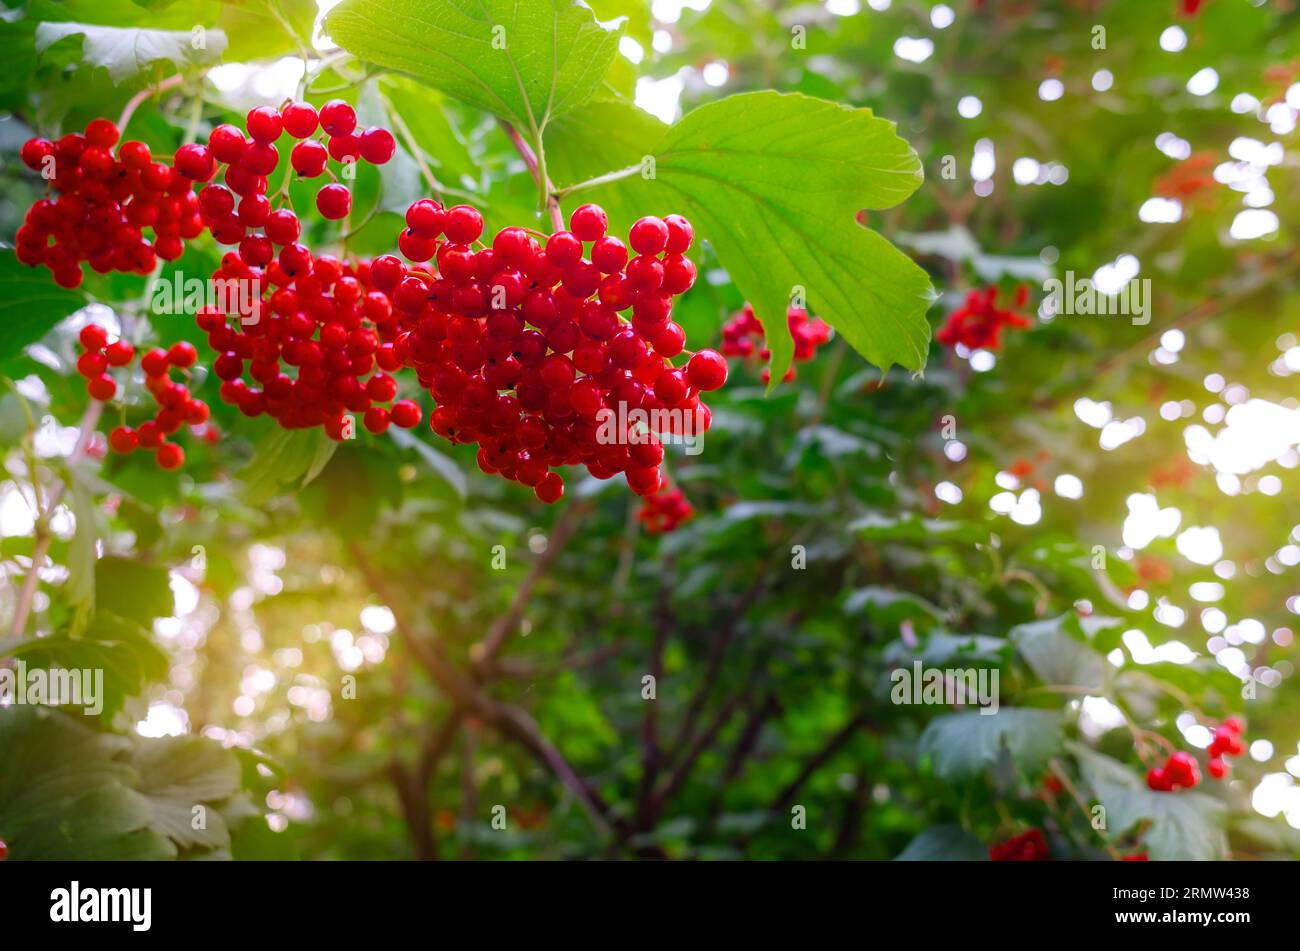 Viburnum berries in tassels on branches with green leaves. Stock Photo